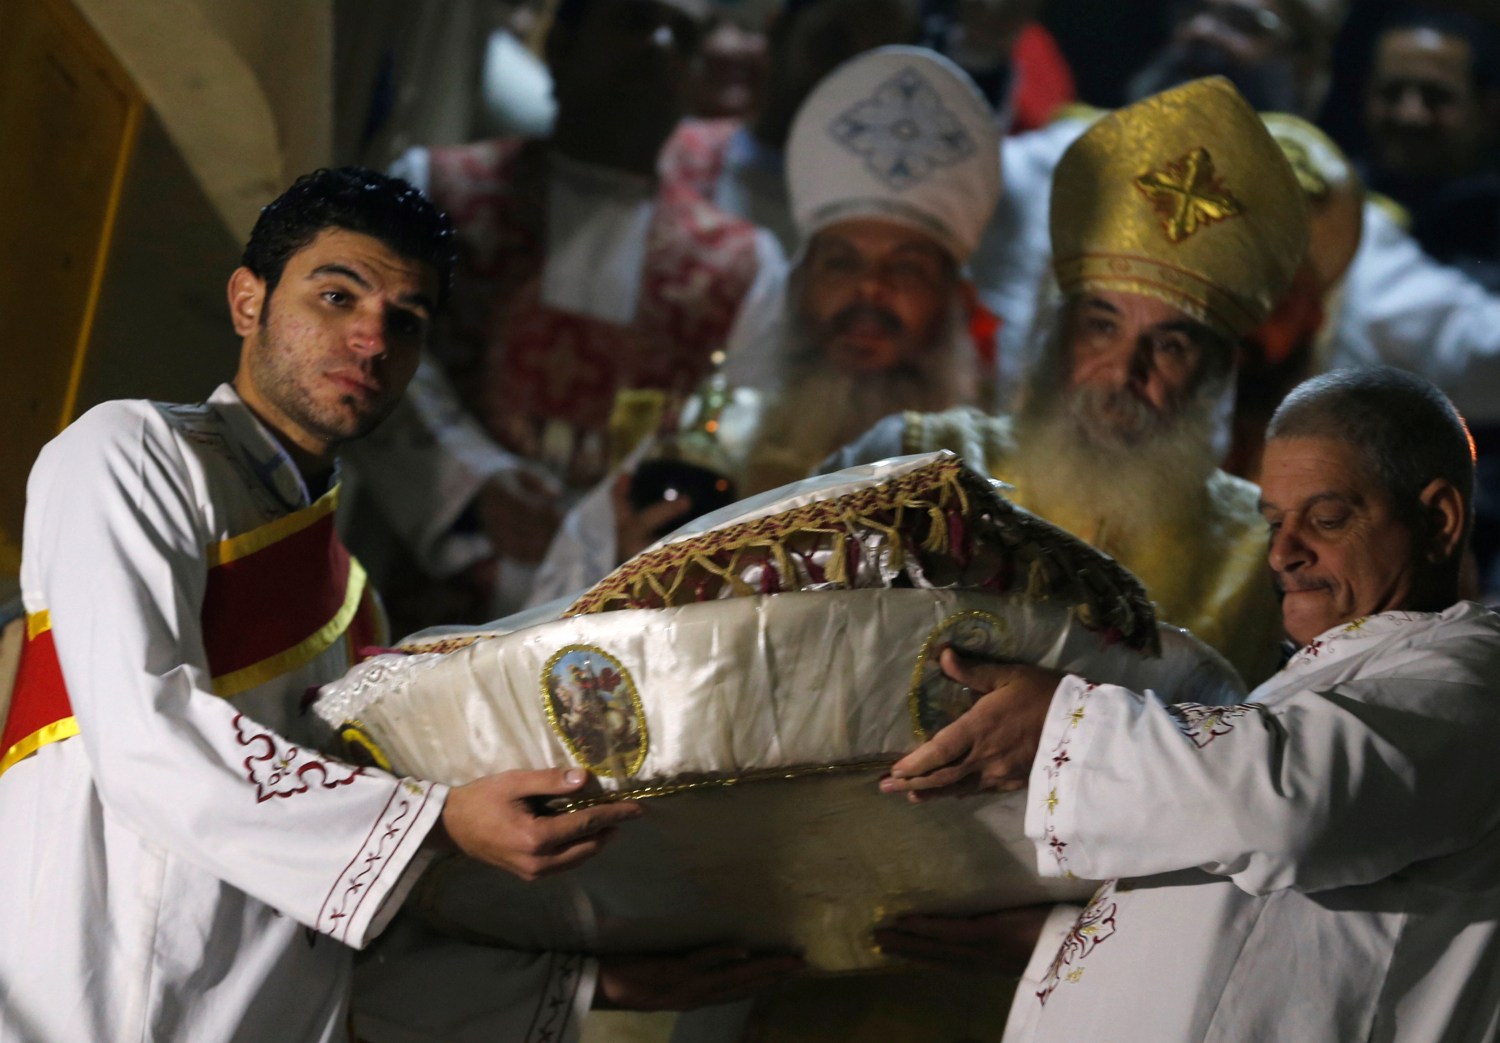 Coptic priests pray during Egypt's Coptic Christmas eve mass in a church of the Samaan el-Kharaz Monastery in the Mokattam Mountain area of Cairo, Egypt January 6, 2017. REUTERS/Amr Abdallah Dalsh